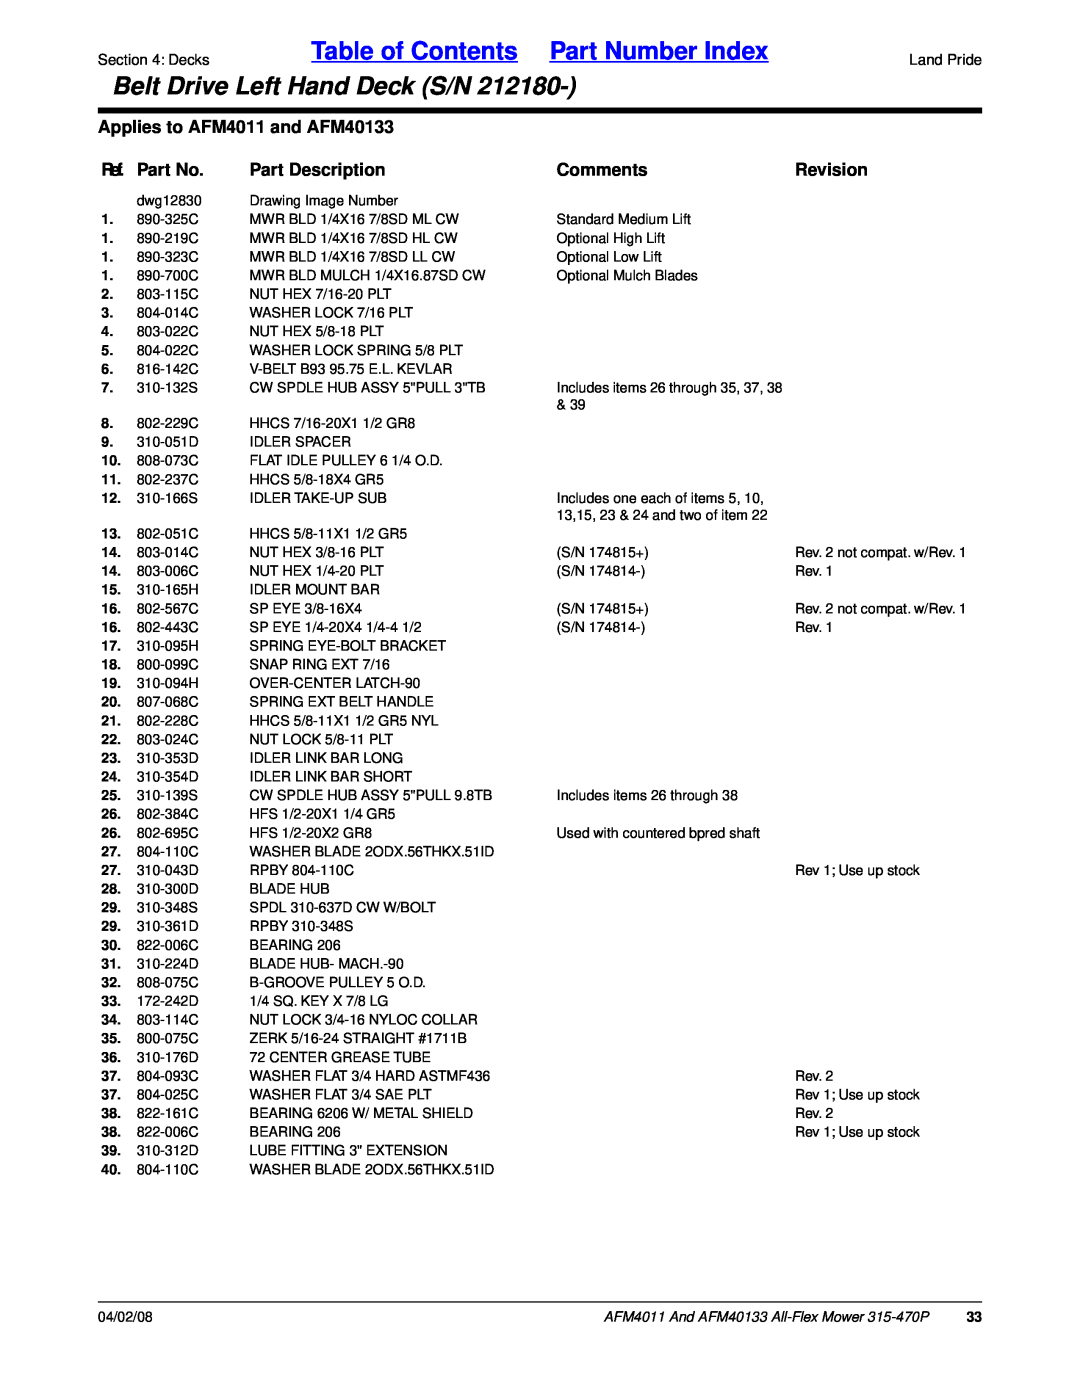 Land Pride manual Table of Contents Part Number Index, Belt Drive Left Hand Deck S/N, Applies to AFM4011 and AFM40133 